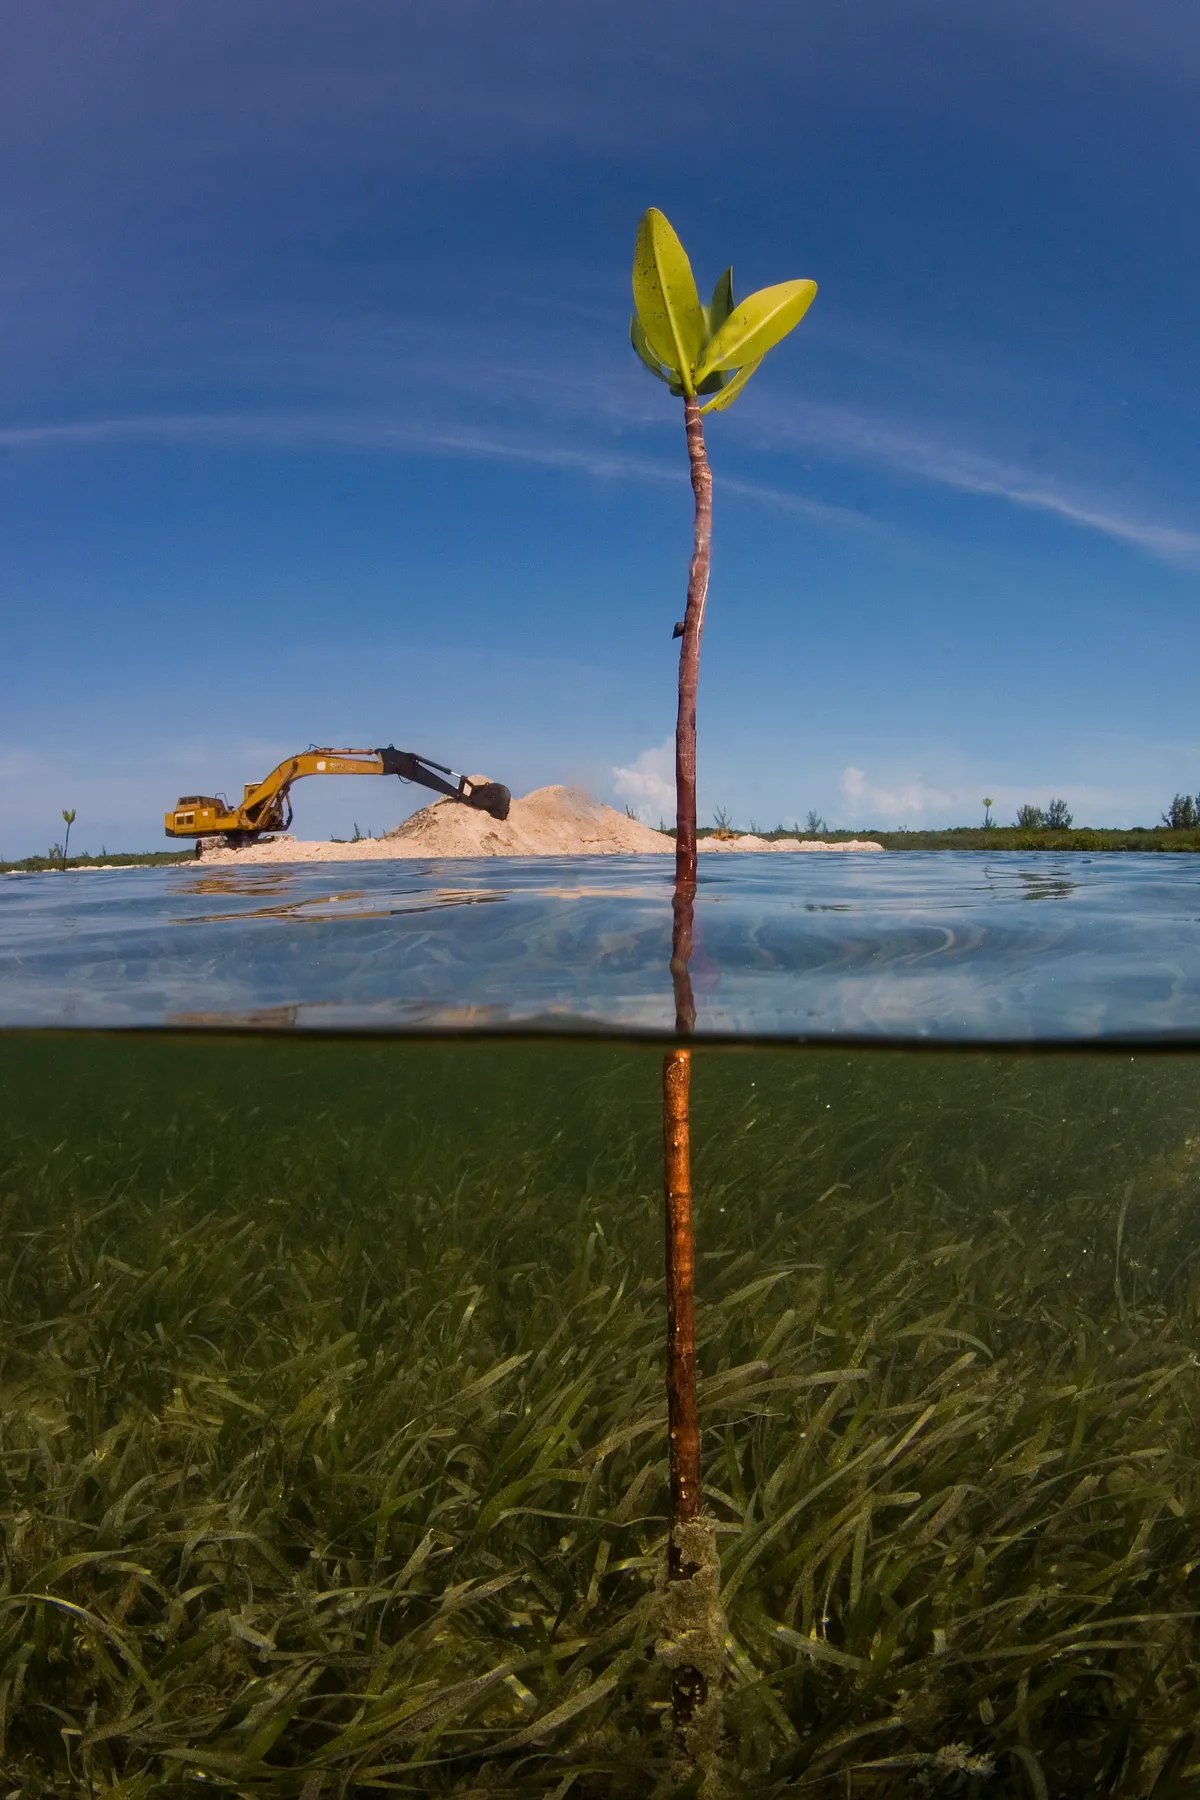 Mangrove & Bulldozer: I took this split shot of a sand spit being built across a shallow lagoon. By the next day the mangrove shoot pictured was buried under piles of fill. This development had no building permits and is indicative of how projects can move forward and do damage without any legal authority. © Matthew Potenski, Bahamas